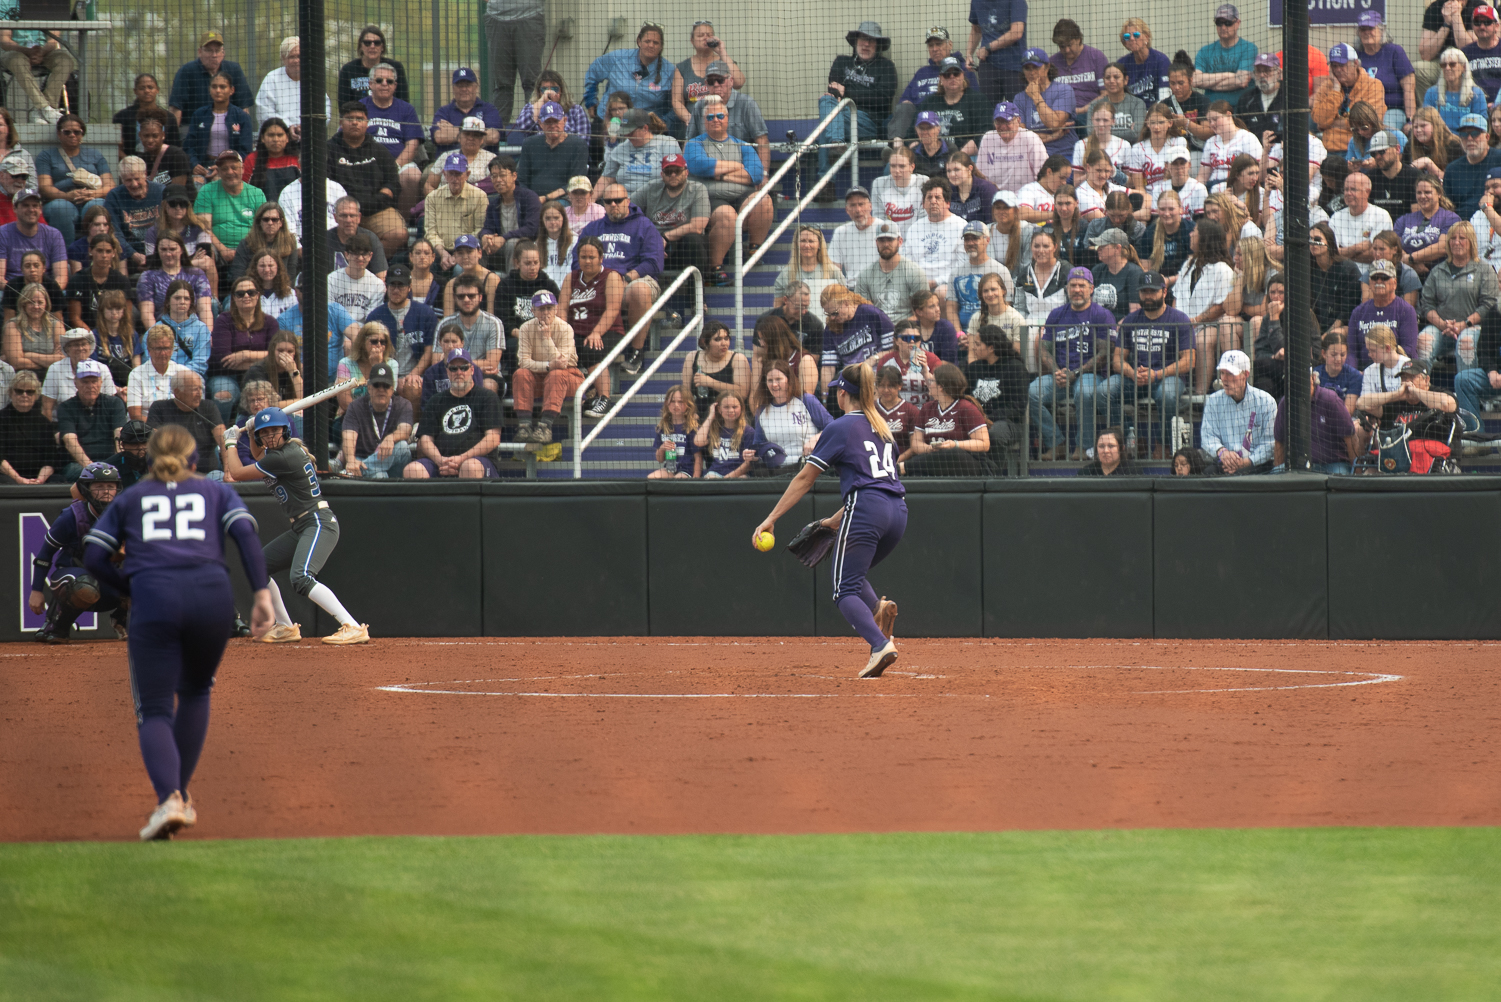 Softball+player+in+purple-and-white+uniform+pitches+the+ball.